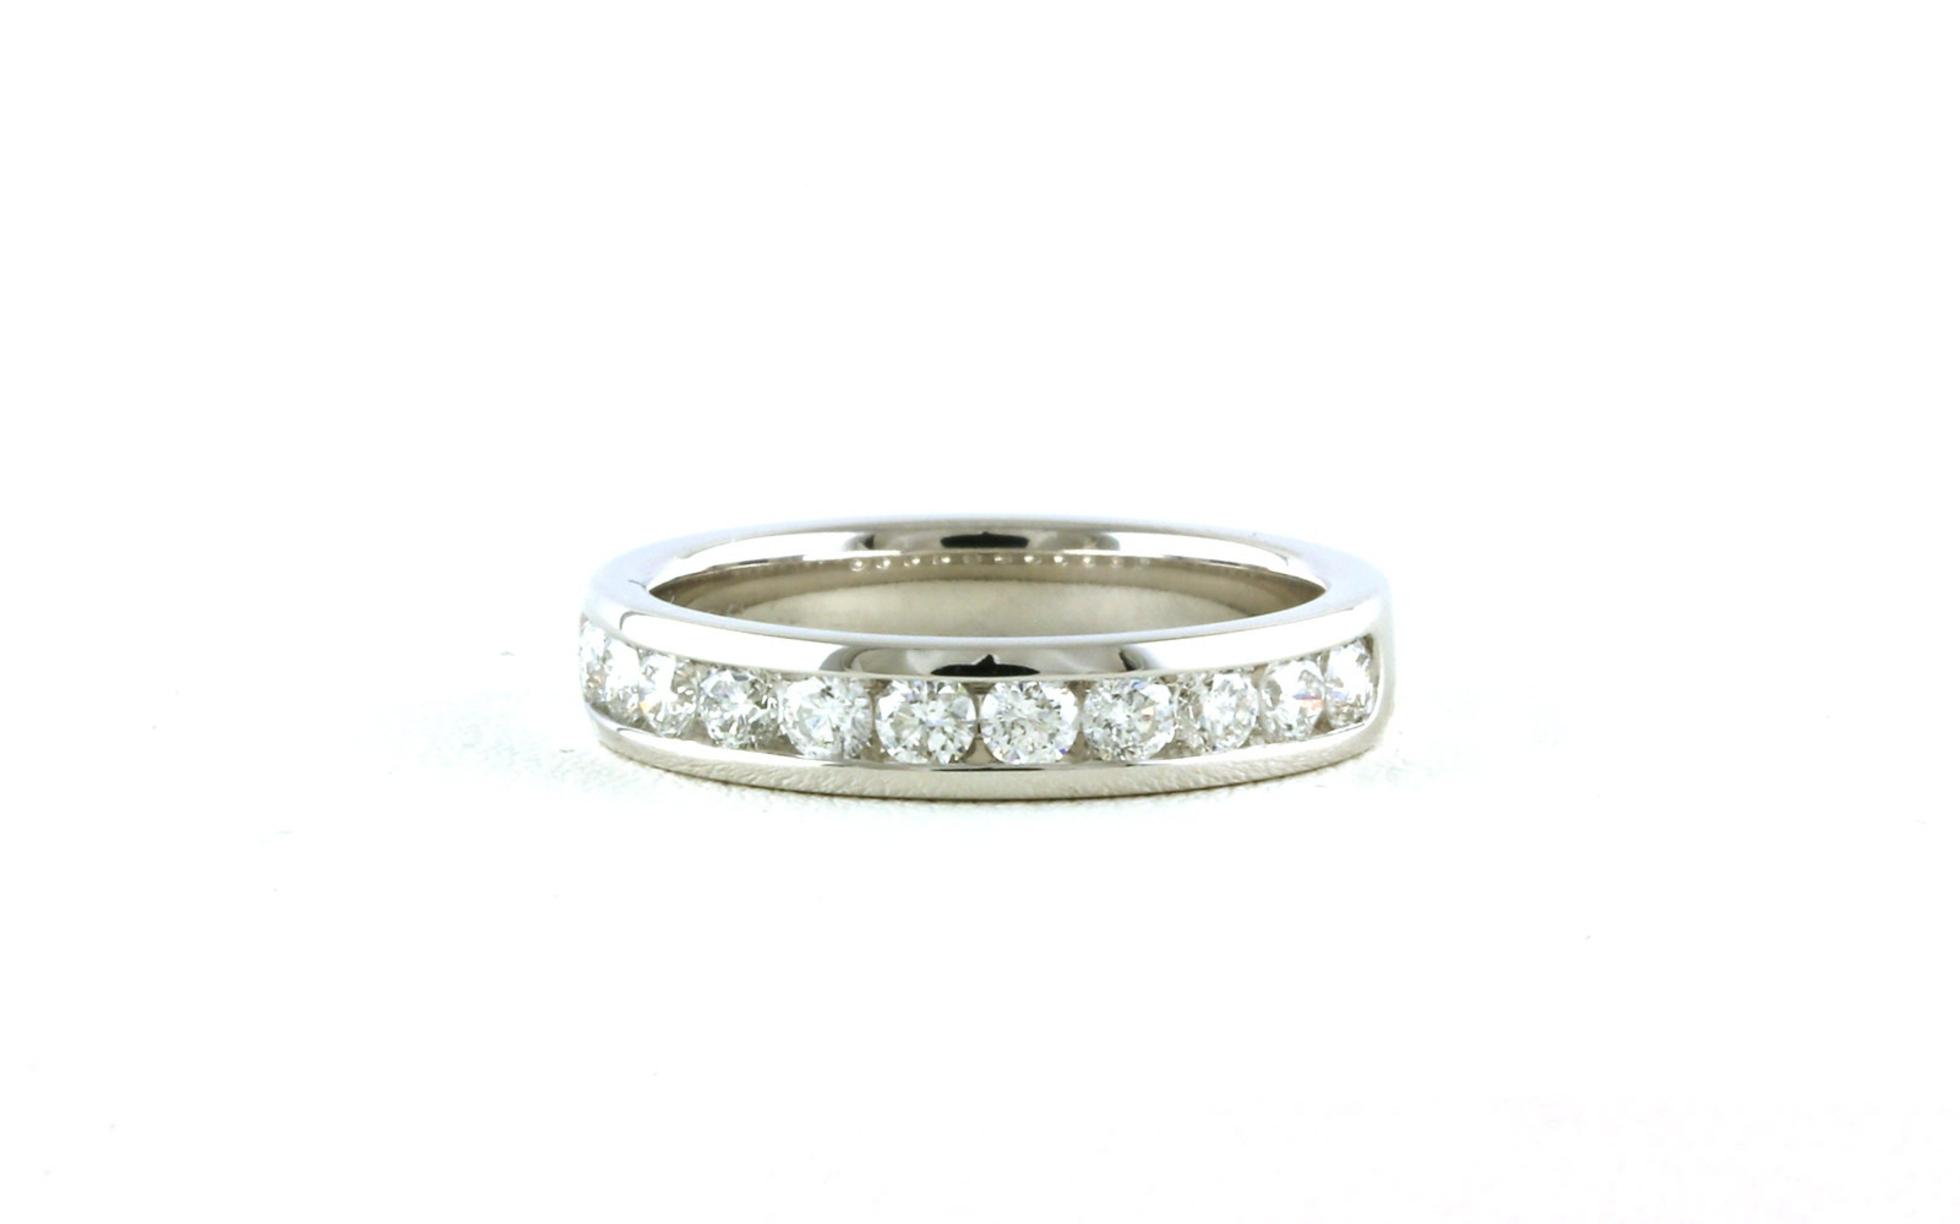 11-Stone Channel-set Diamond Wedding Band in White Gold (0.75cts TWT)